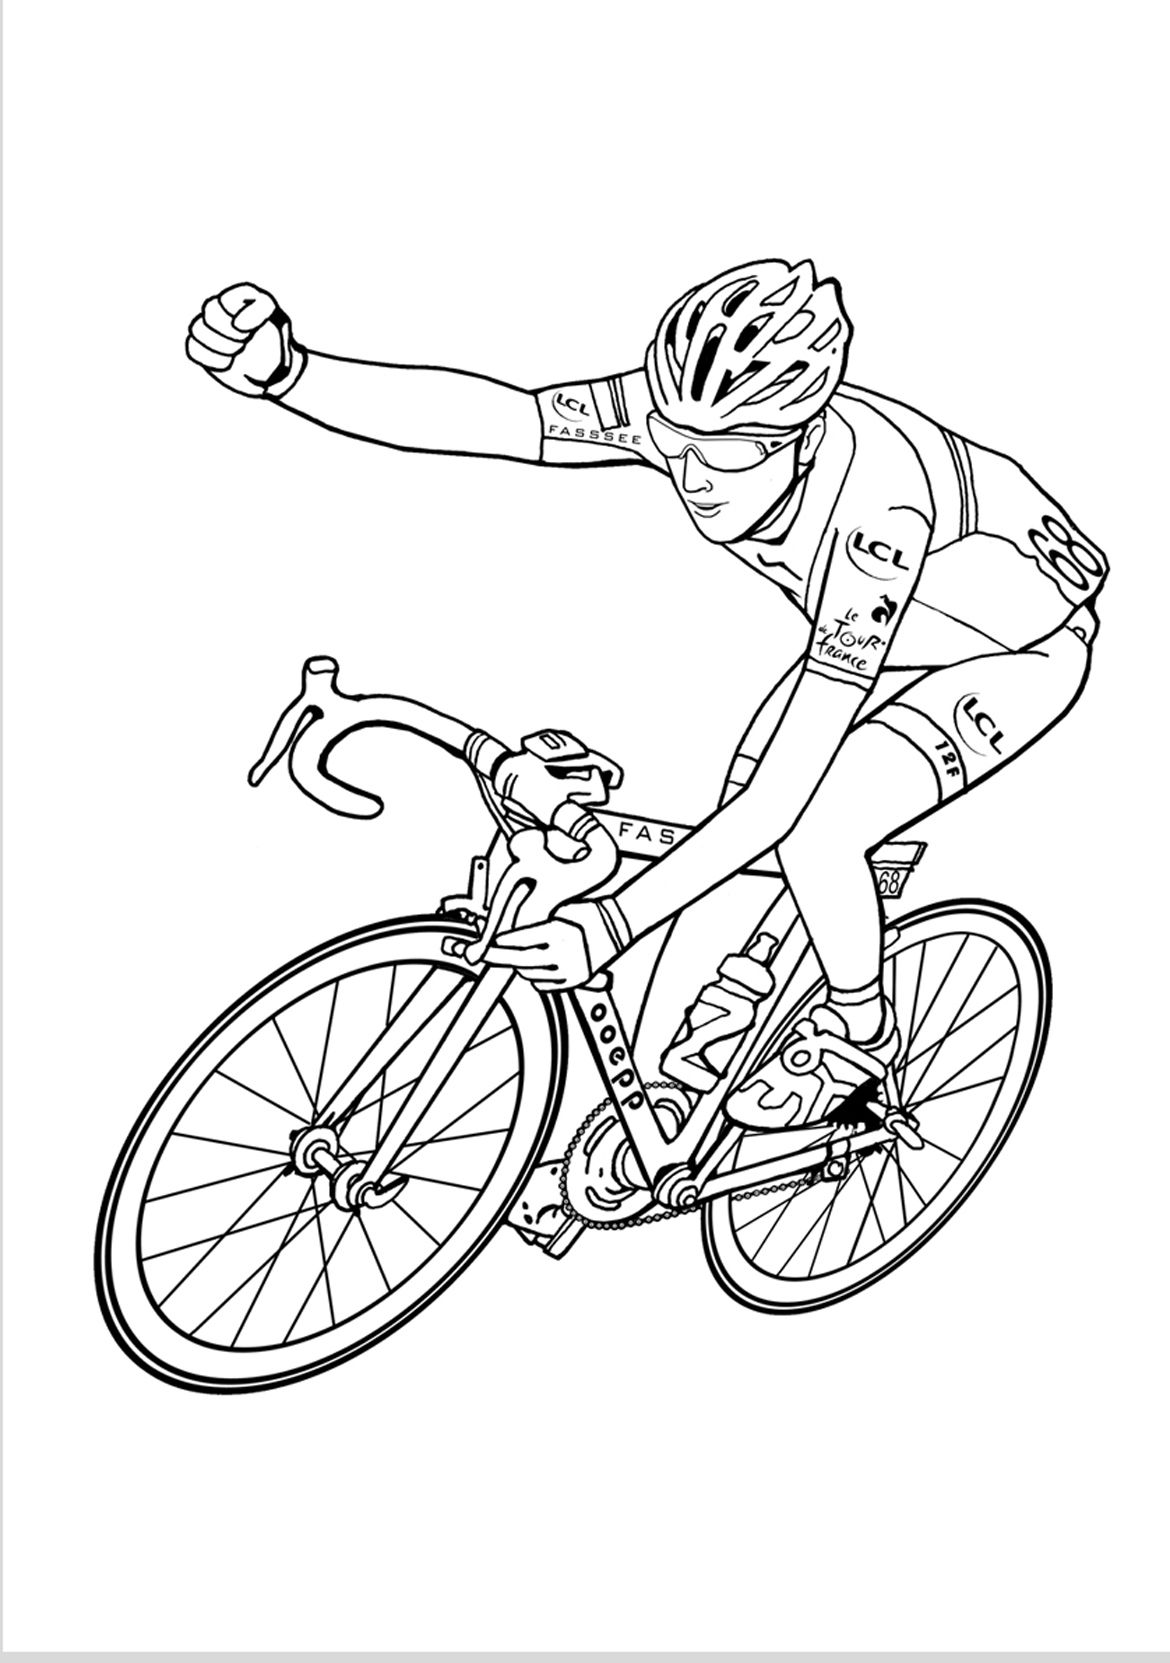 cyclo cross coloring pages to print